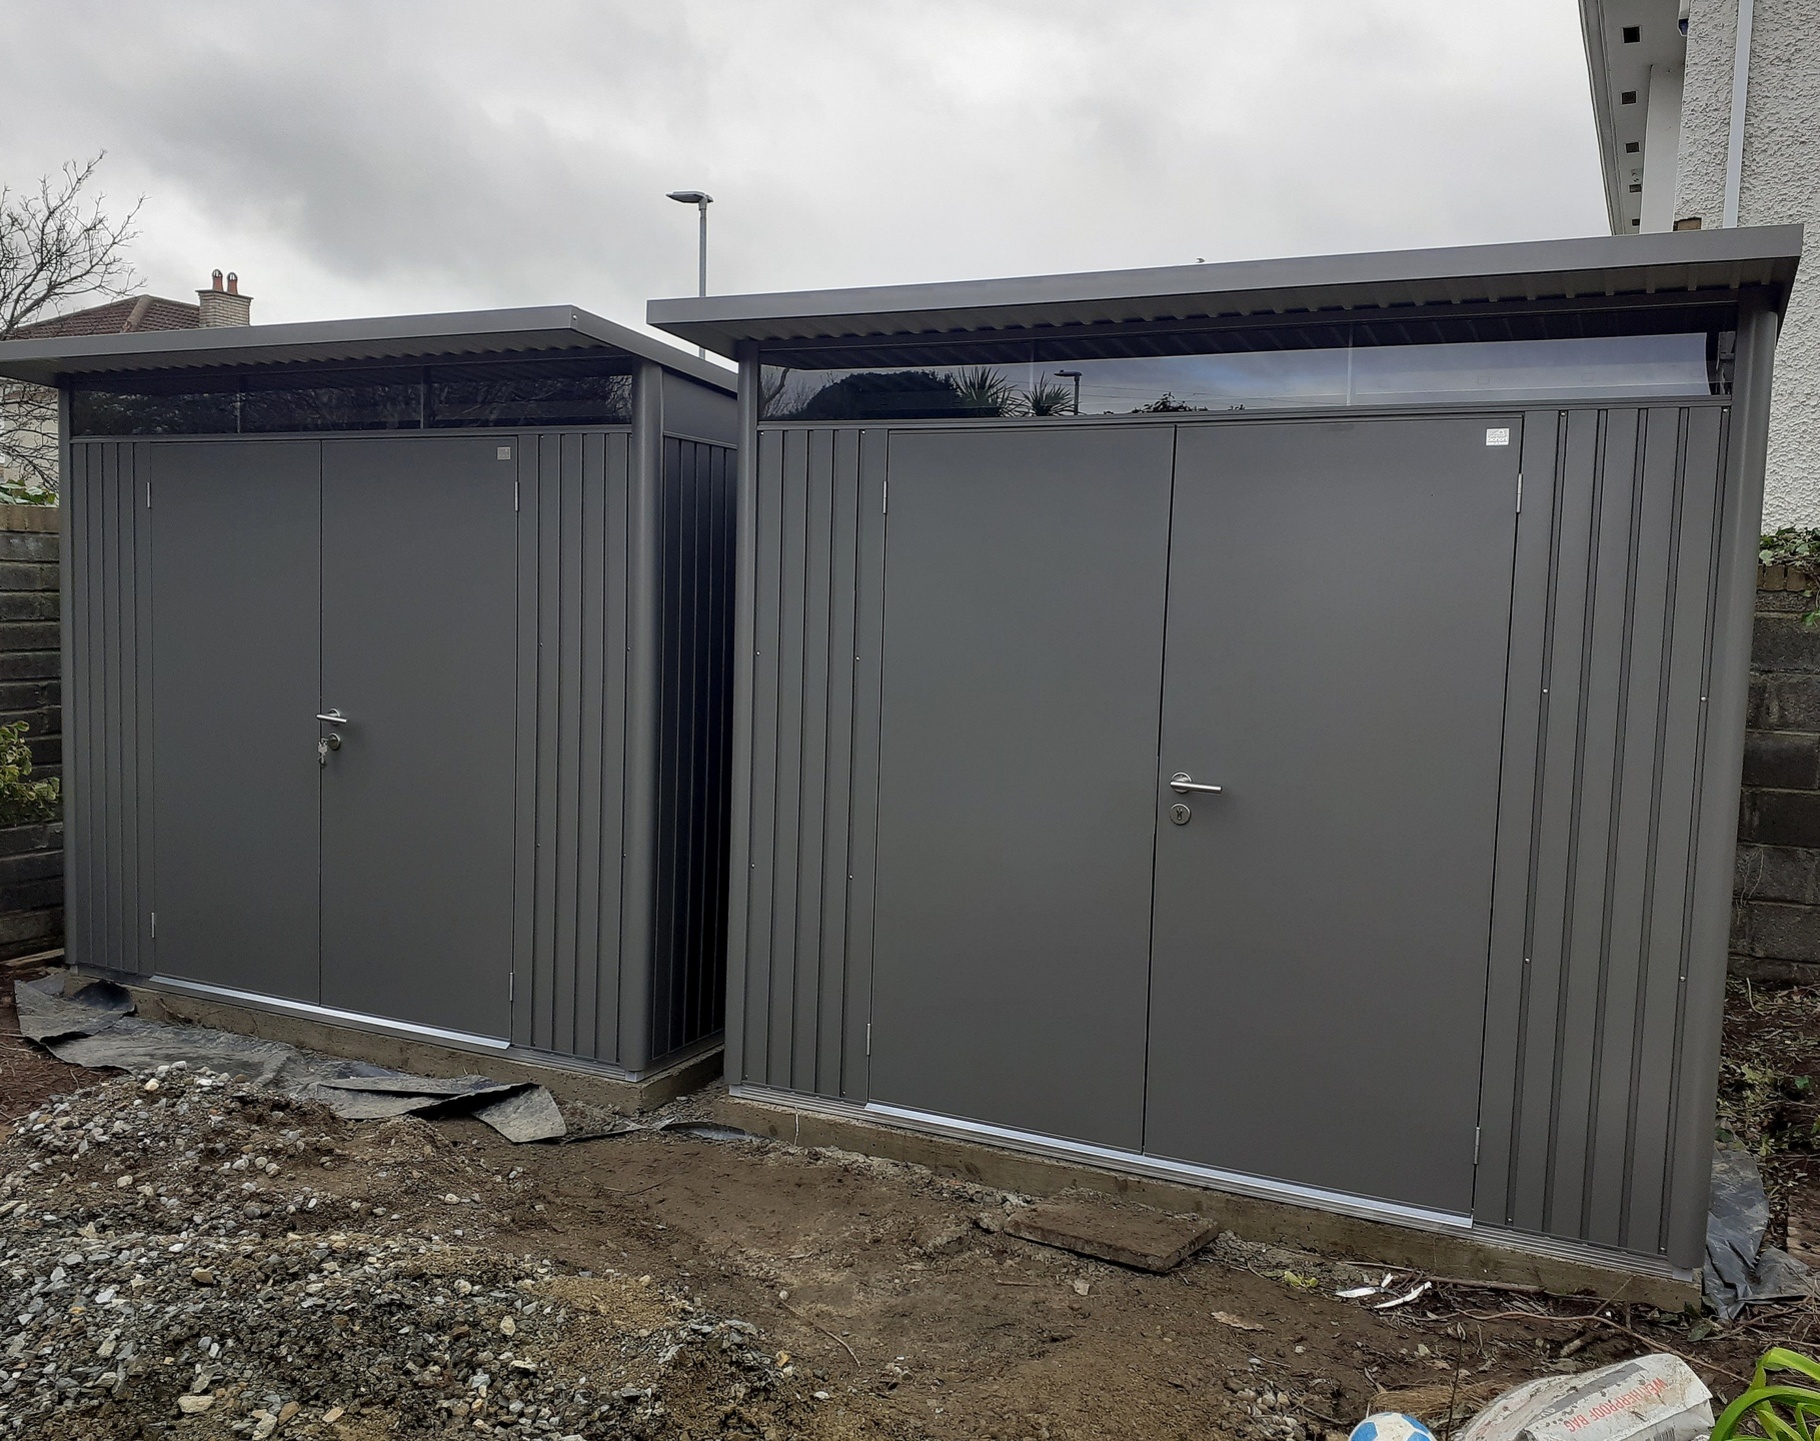 Biohort AvantGarde A7 Garden Sheds - exceptional quality, blending functionality, durability and sleek design  |  Supplied + Fitted in Knocklyon, Dublin 16 by Owen Chubb Landscapers - Ireland's premier Biohort Supplier & Installer.